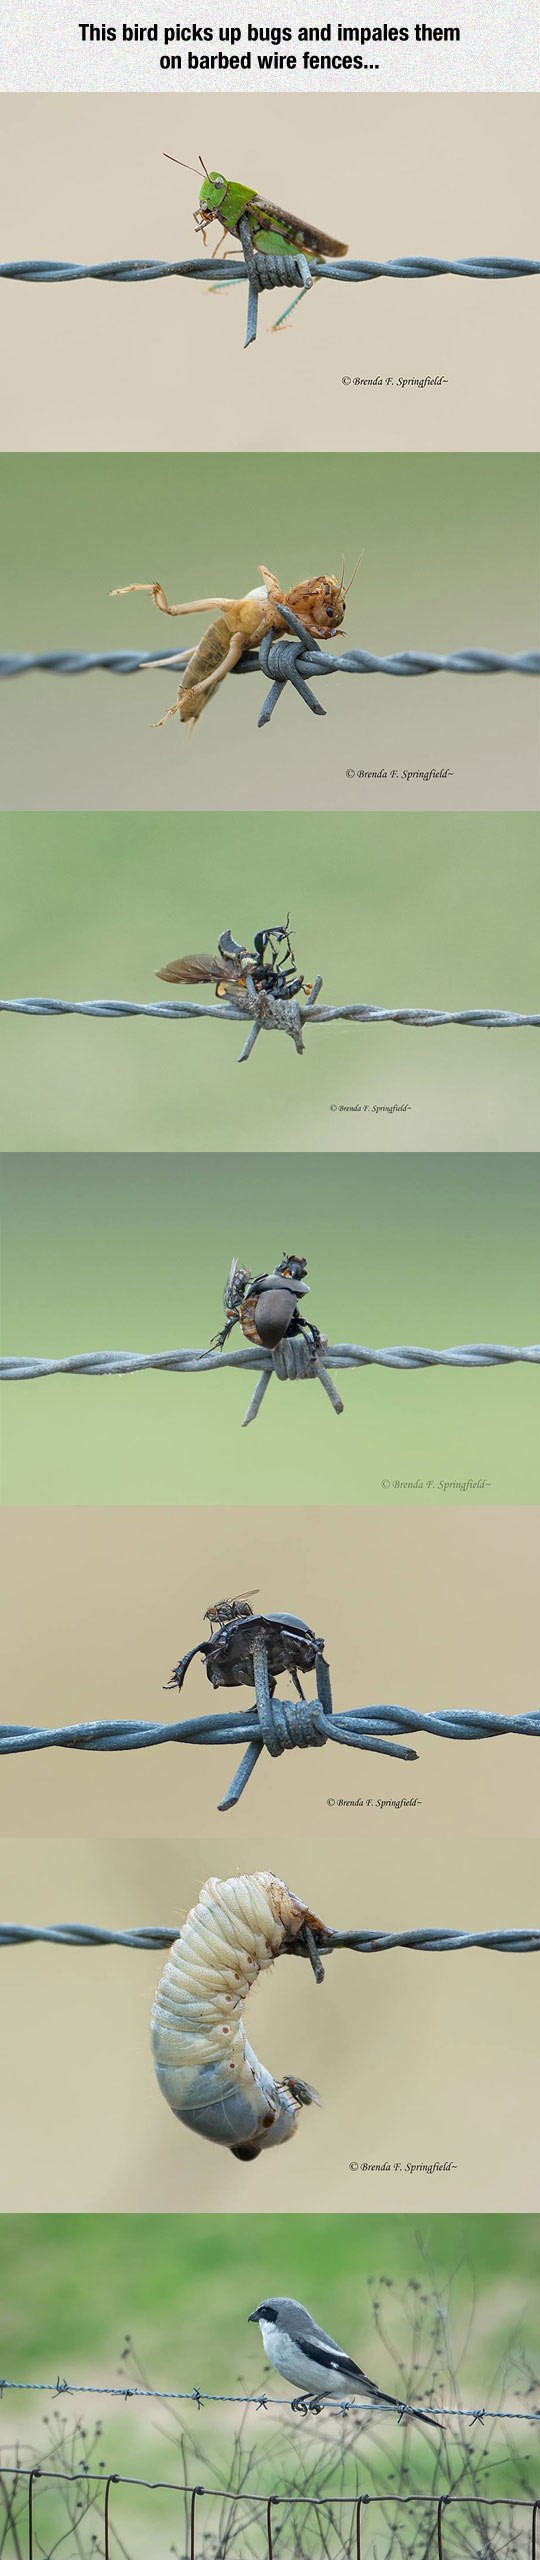 This bird picks up bugs and impales them on the barbed wire. 